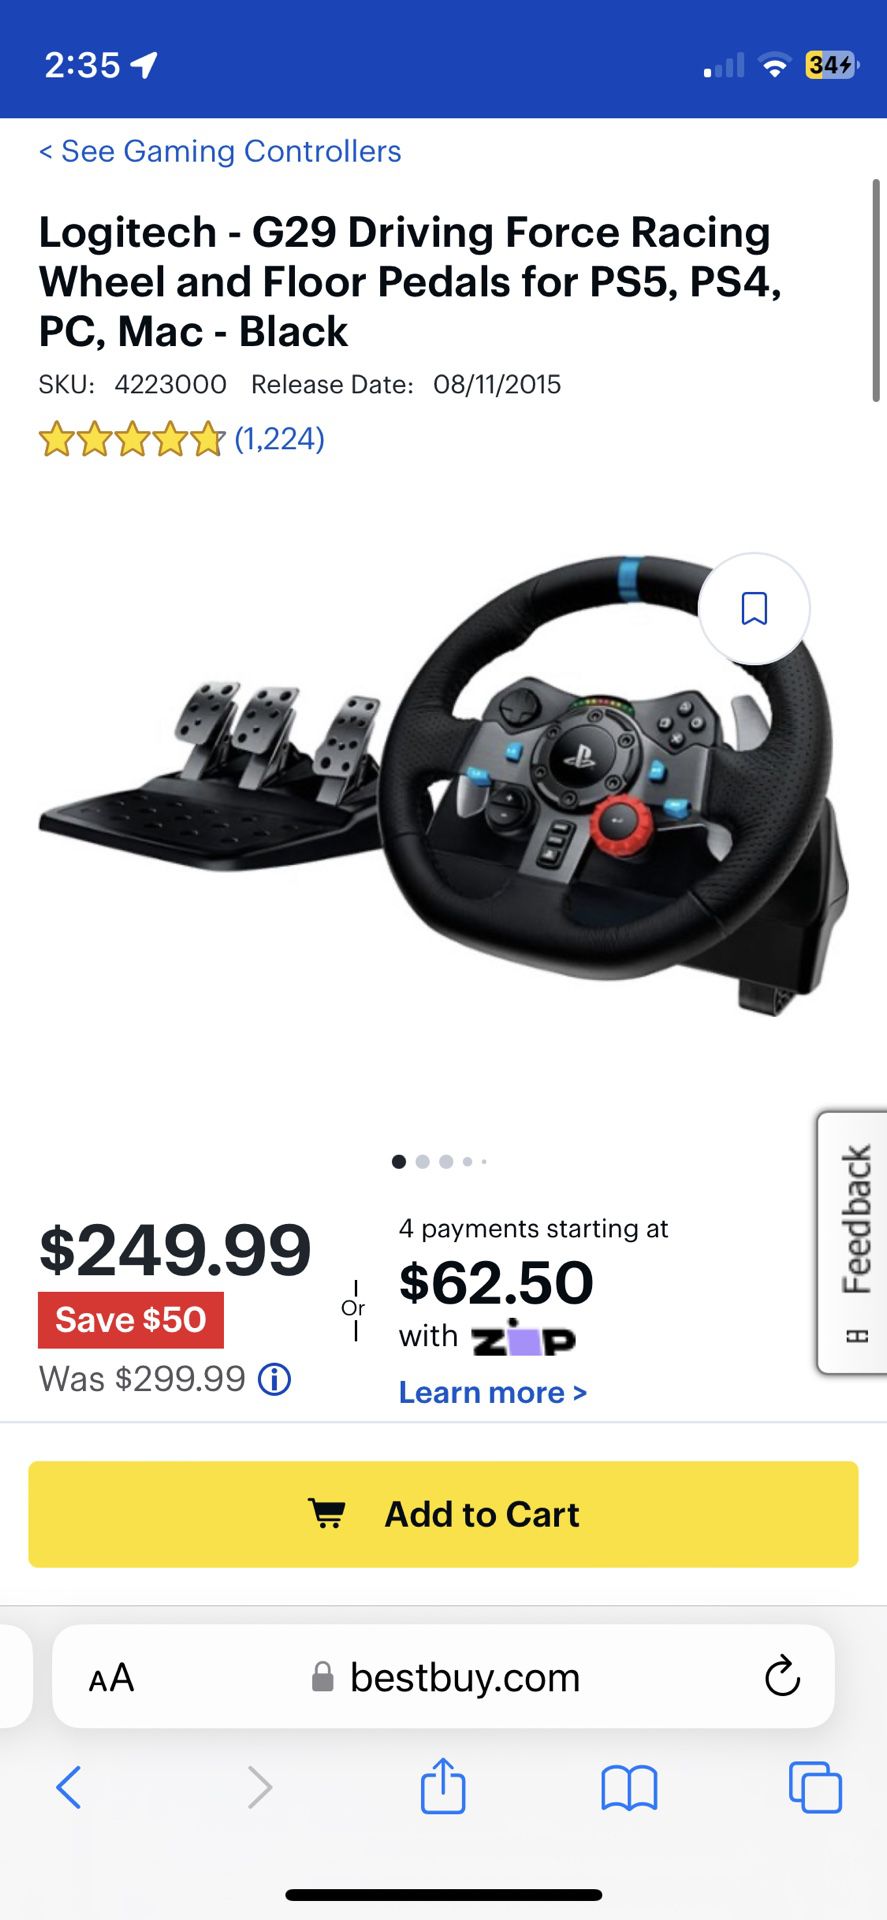 Logitech Volante G29 - Driving Force Racing per PS4/PS3/PC